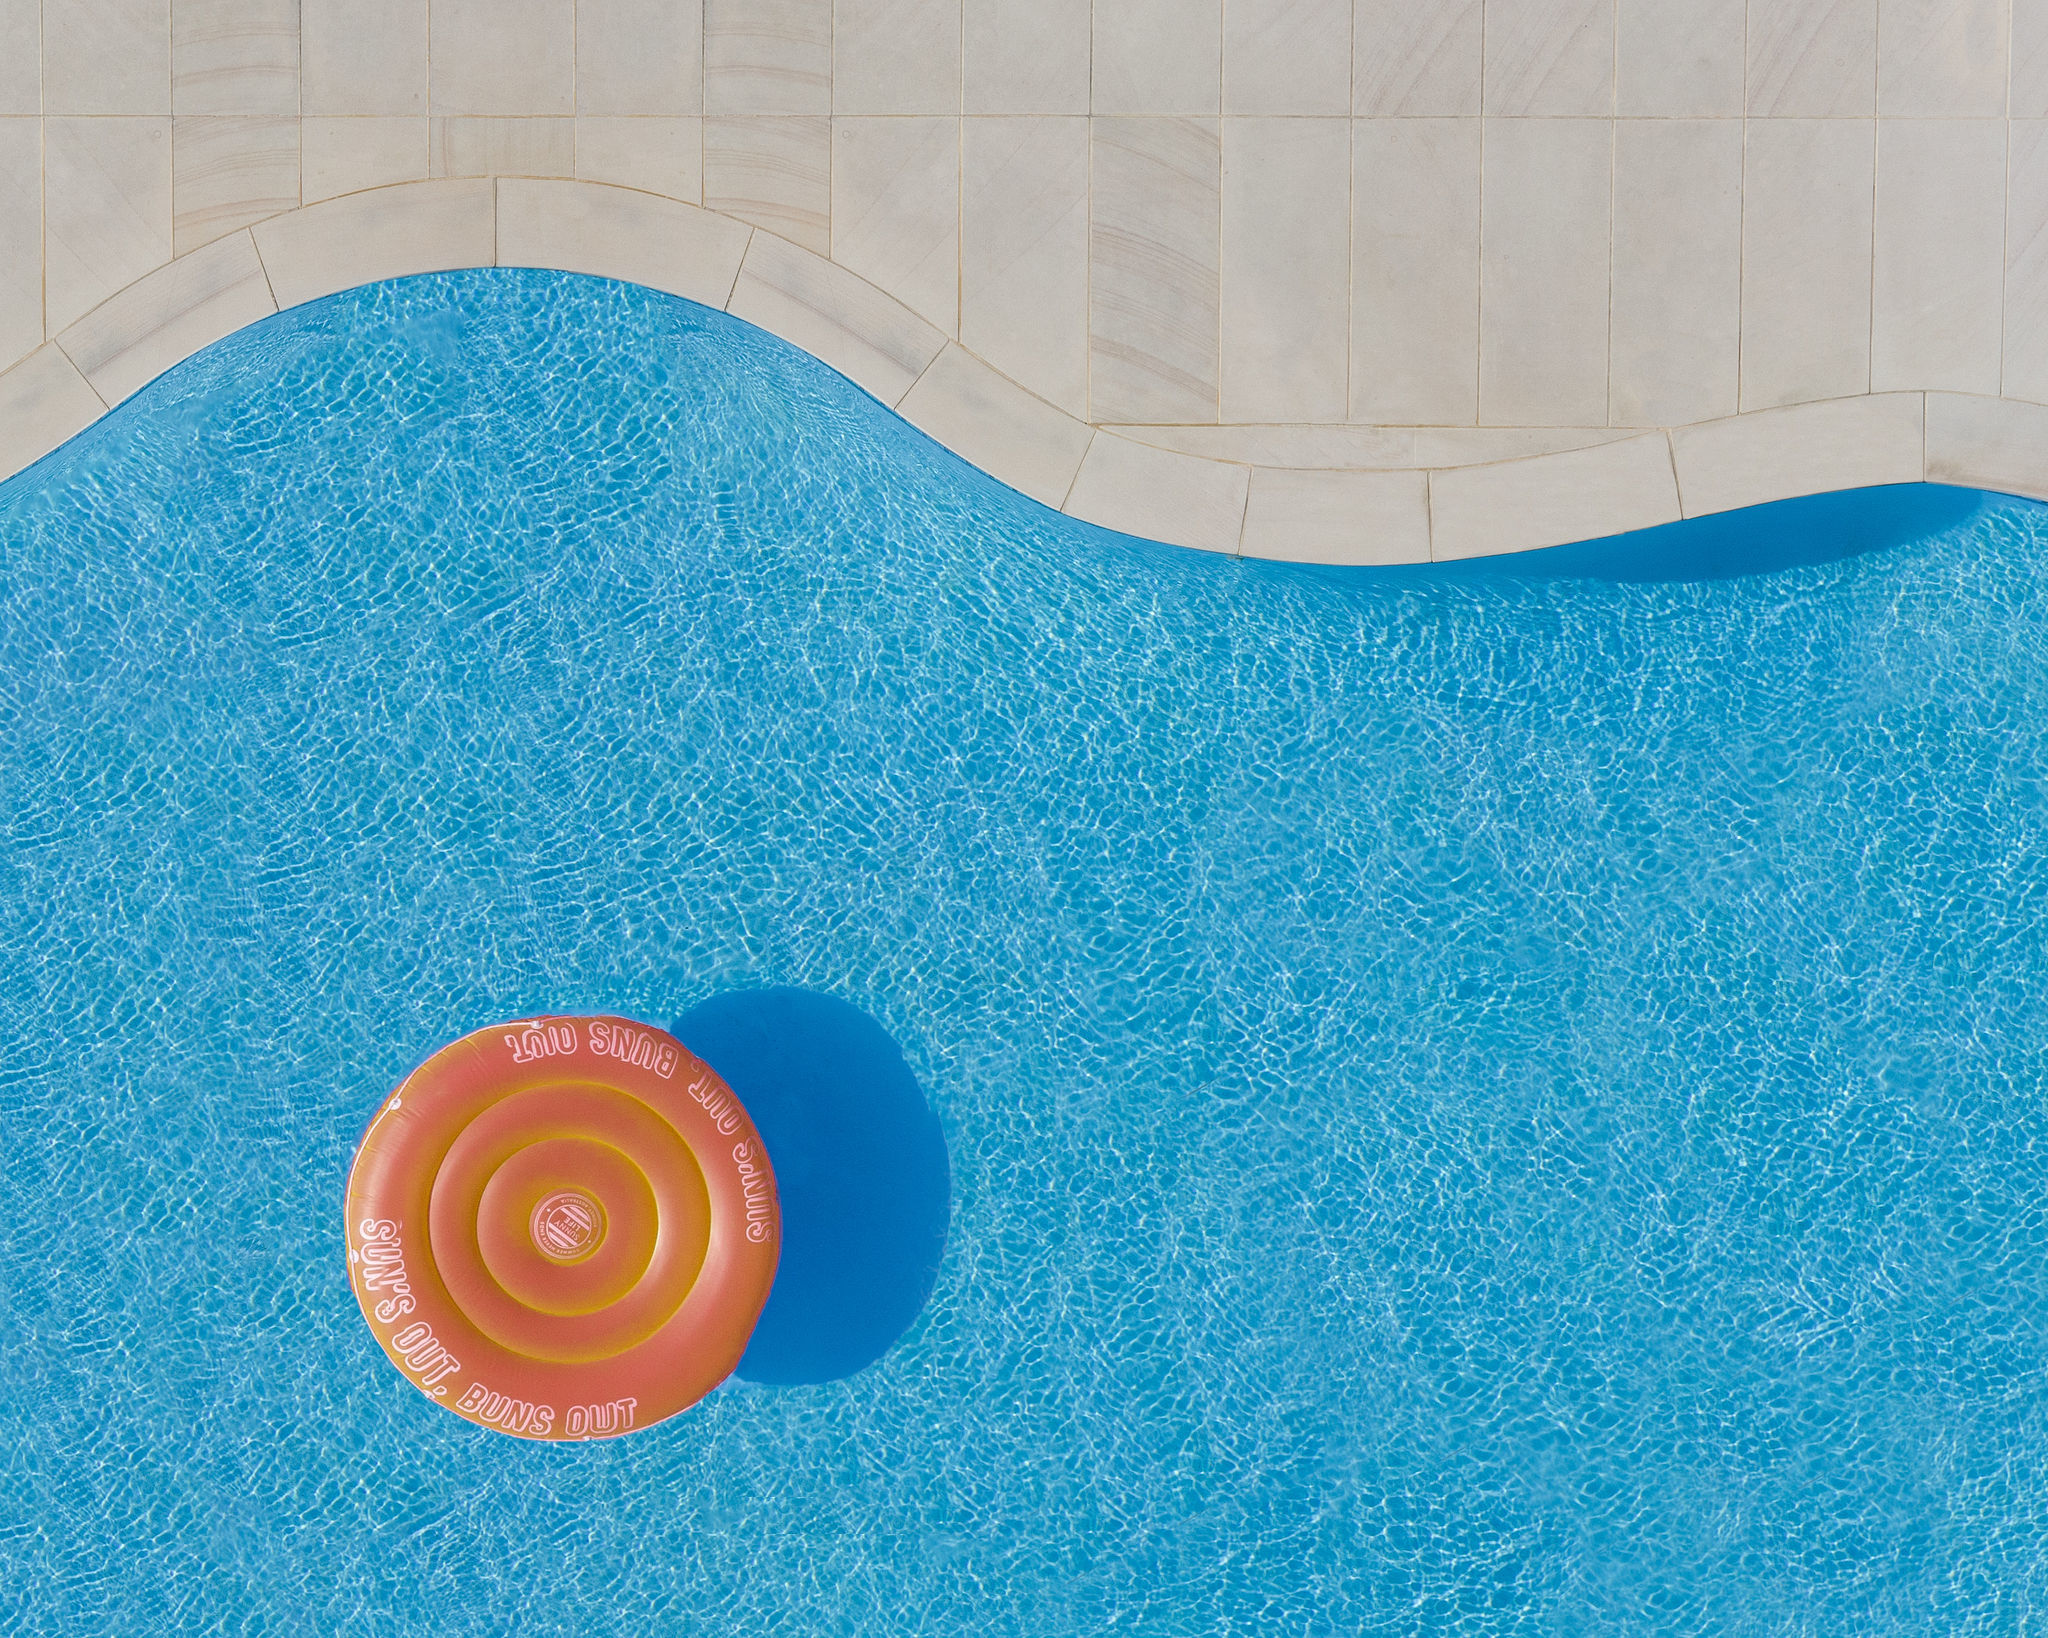 This Photographer Takes Dreamy Photos Of Swimming Pools From Above